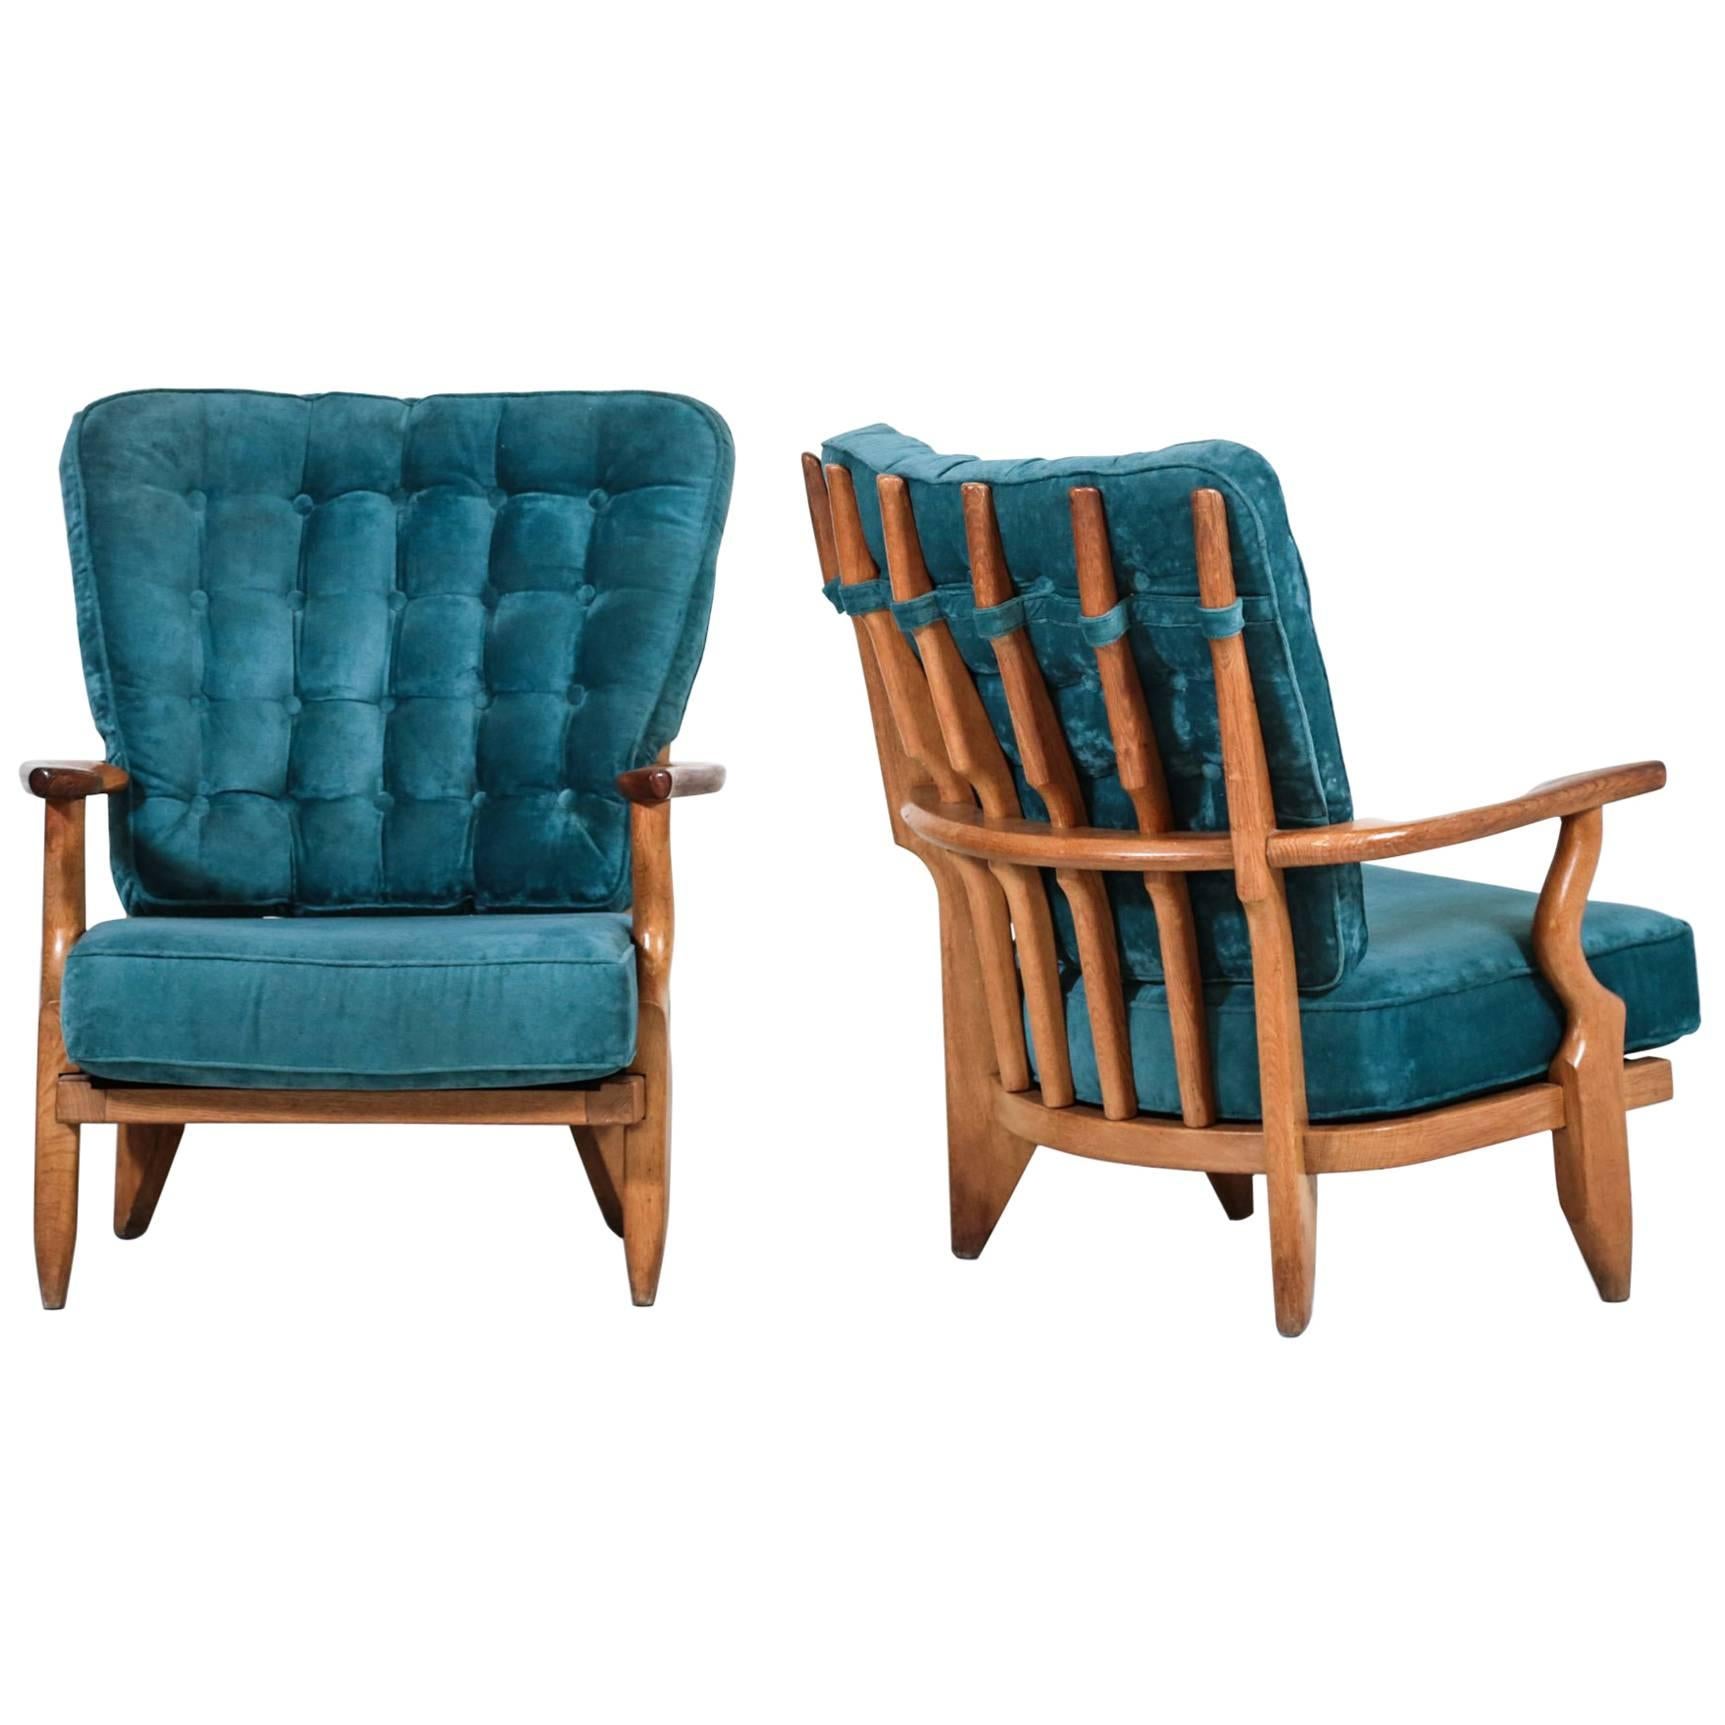 Pair of Guillerme et Chambron Armchairs "Grand Repos", France, 1950s